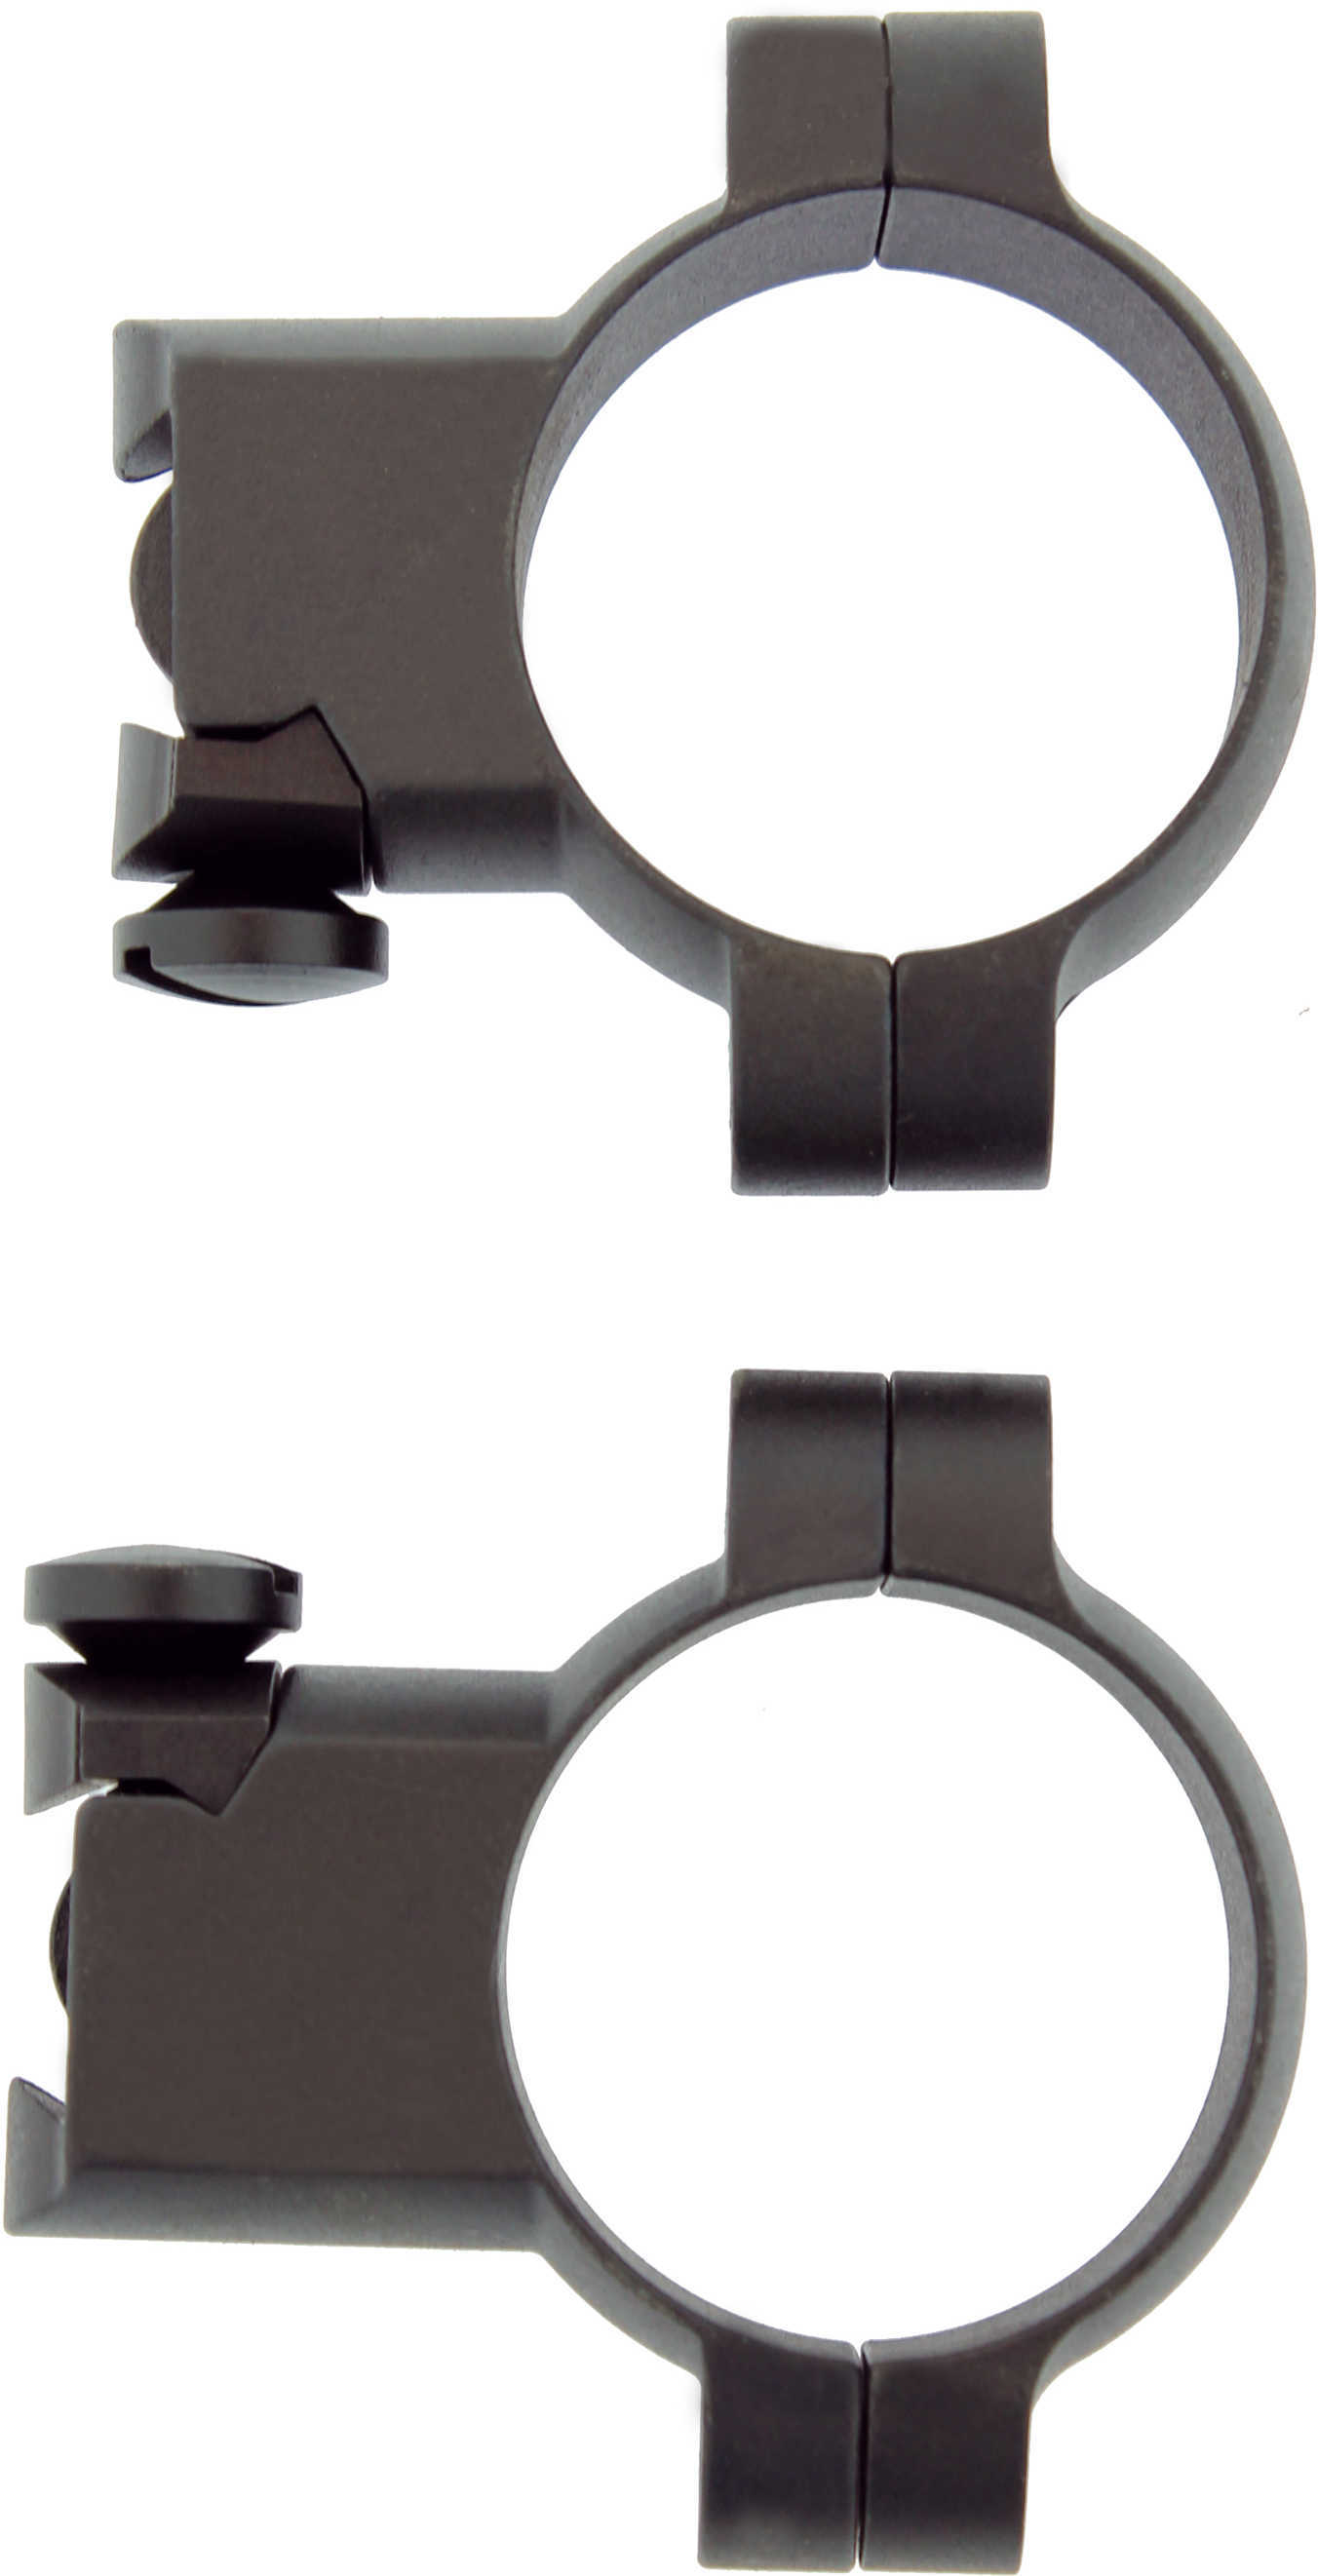 Leupold Super High Ruger® Rings With Matte Black Finish Md: 51043